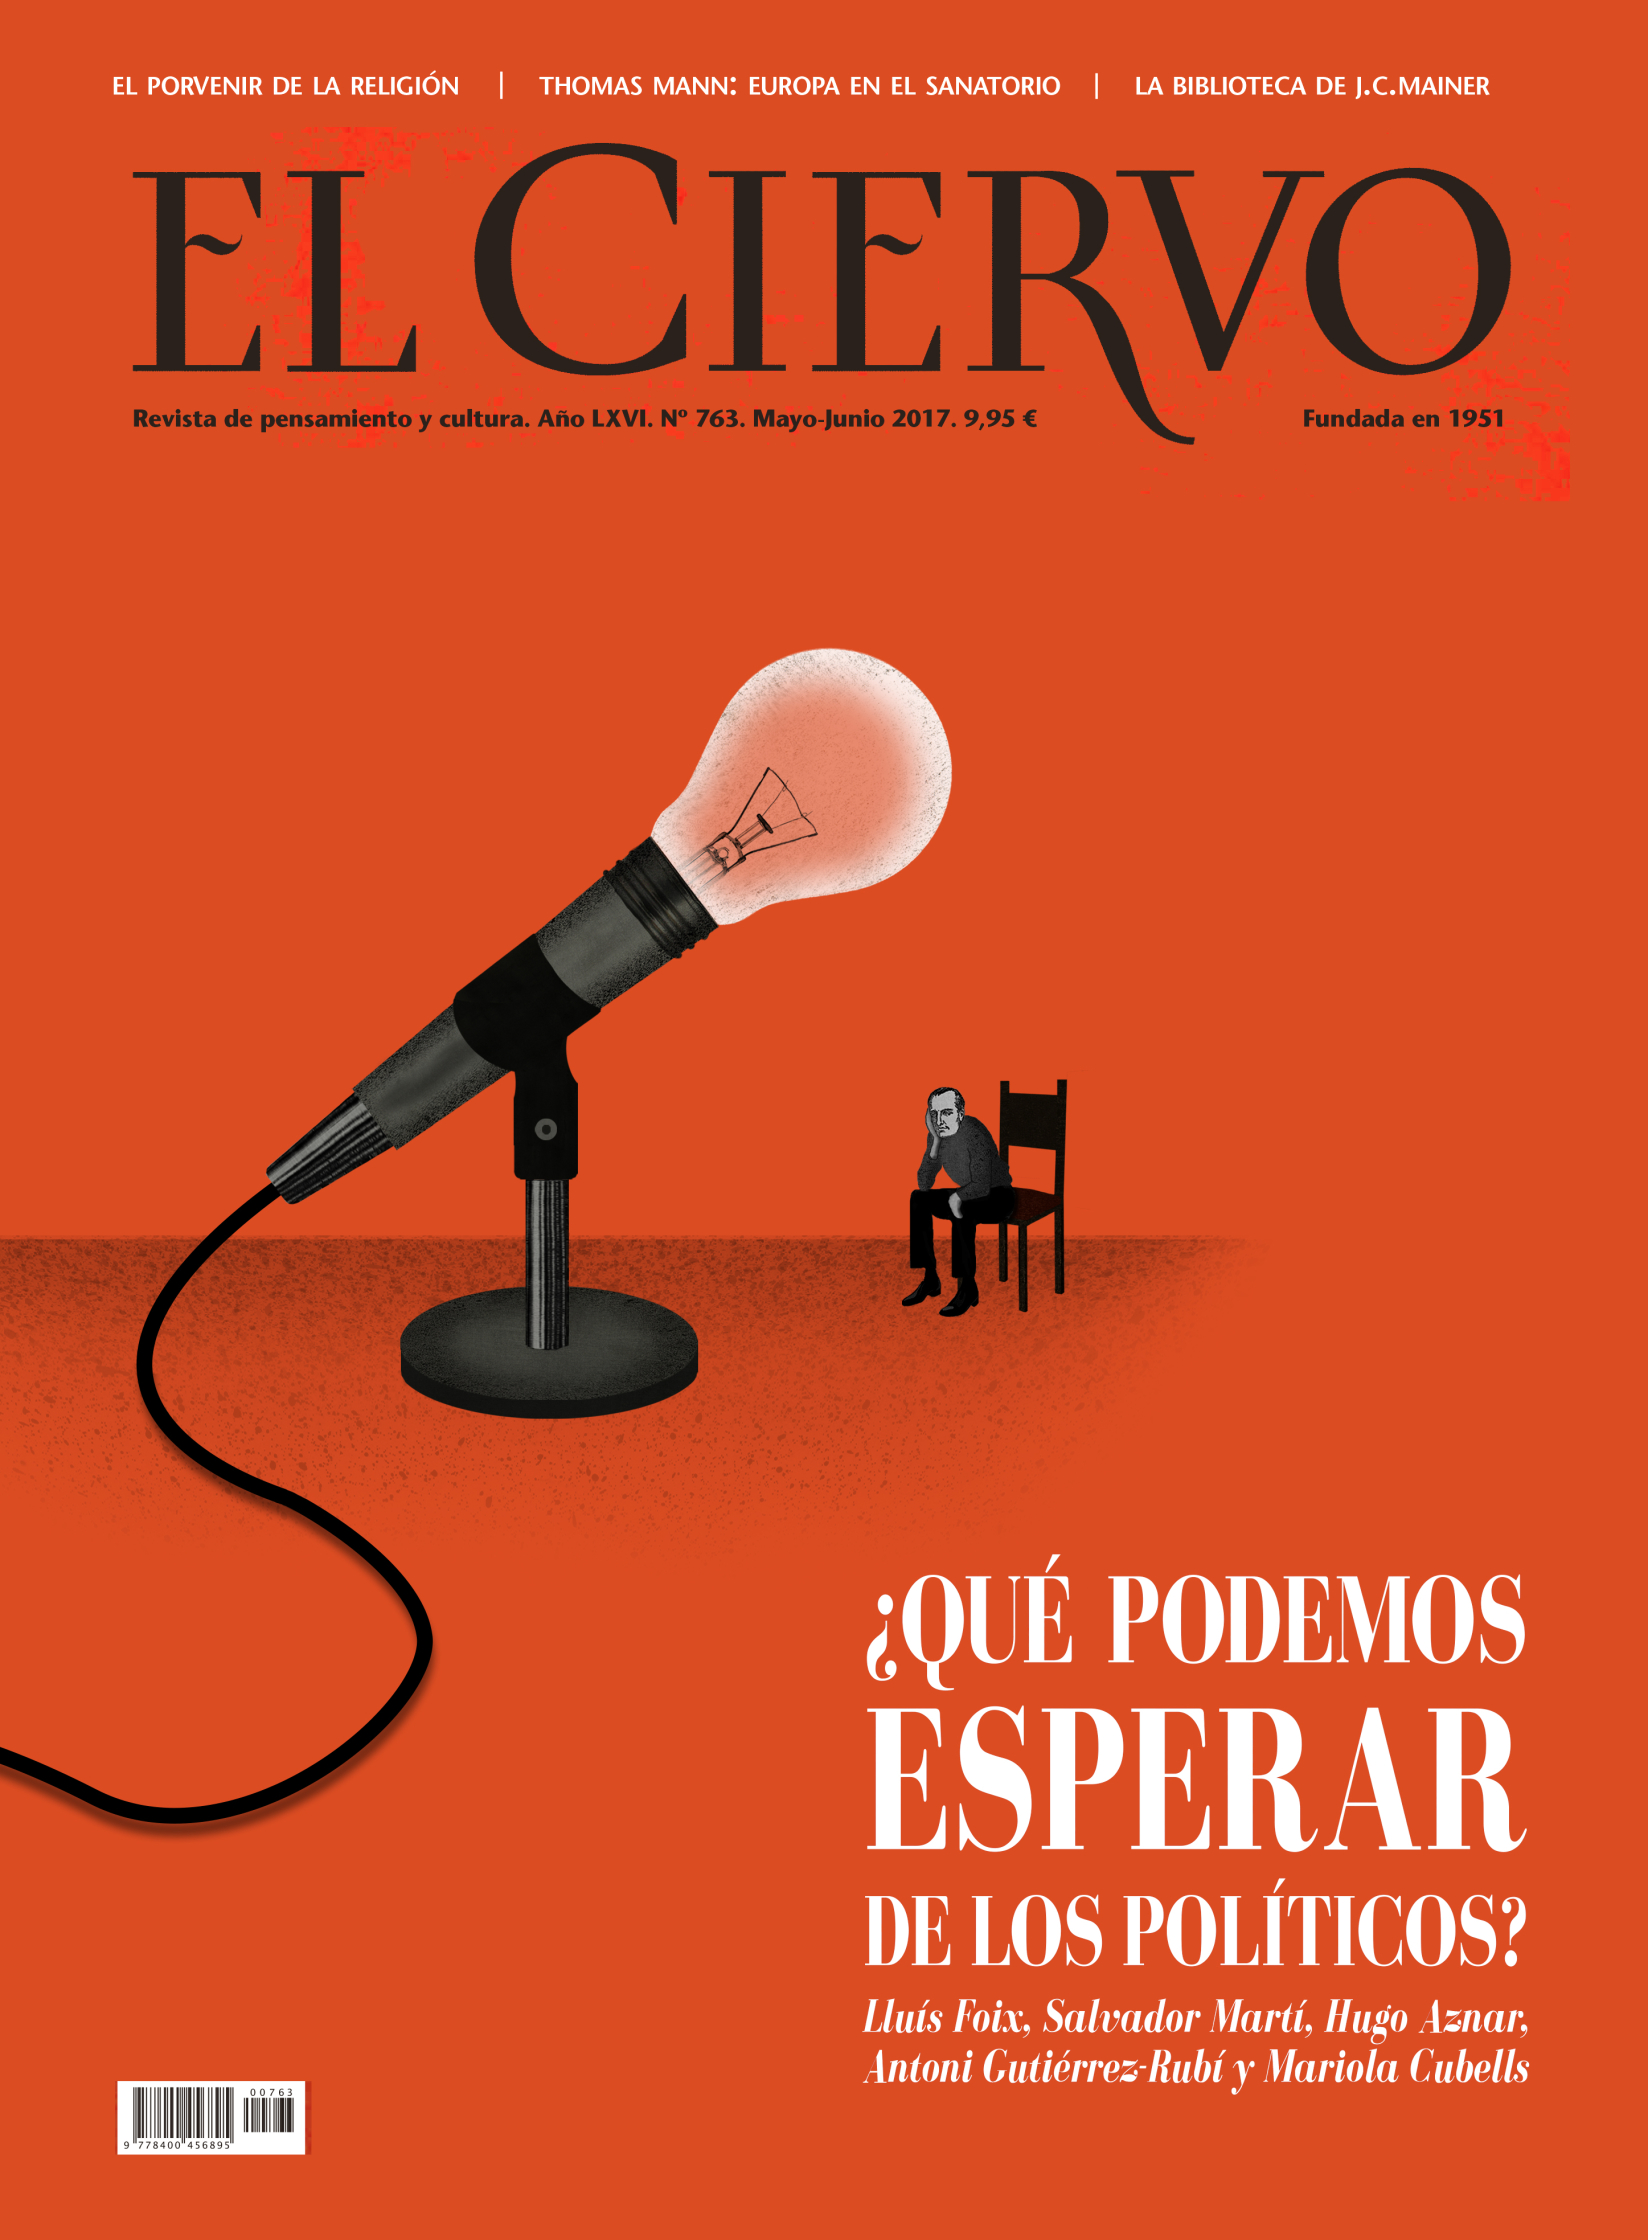 Cover for El Ciervo Magazine (What can we expect from politicians).jpg